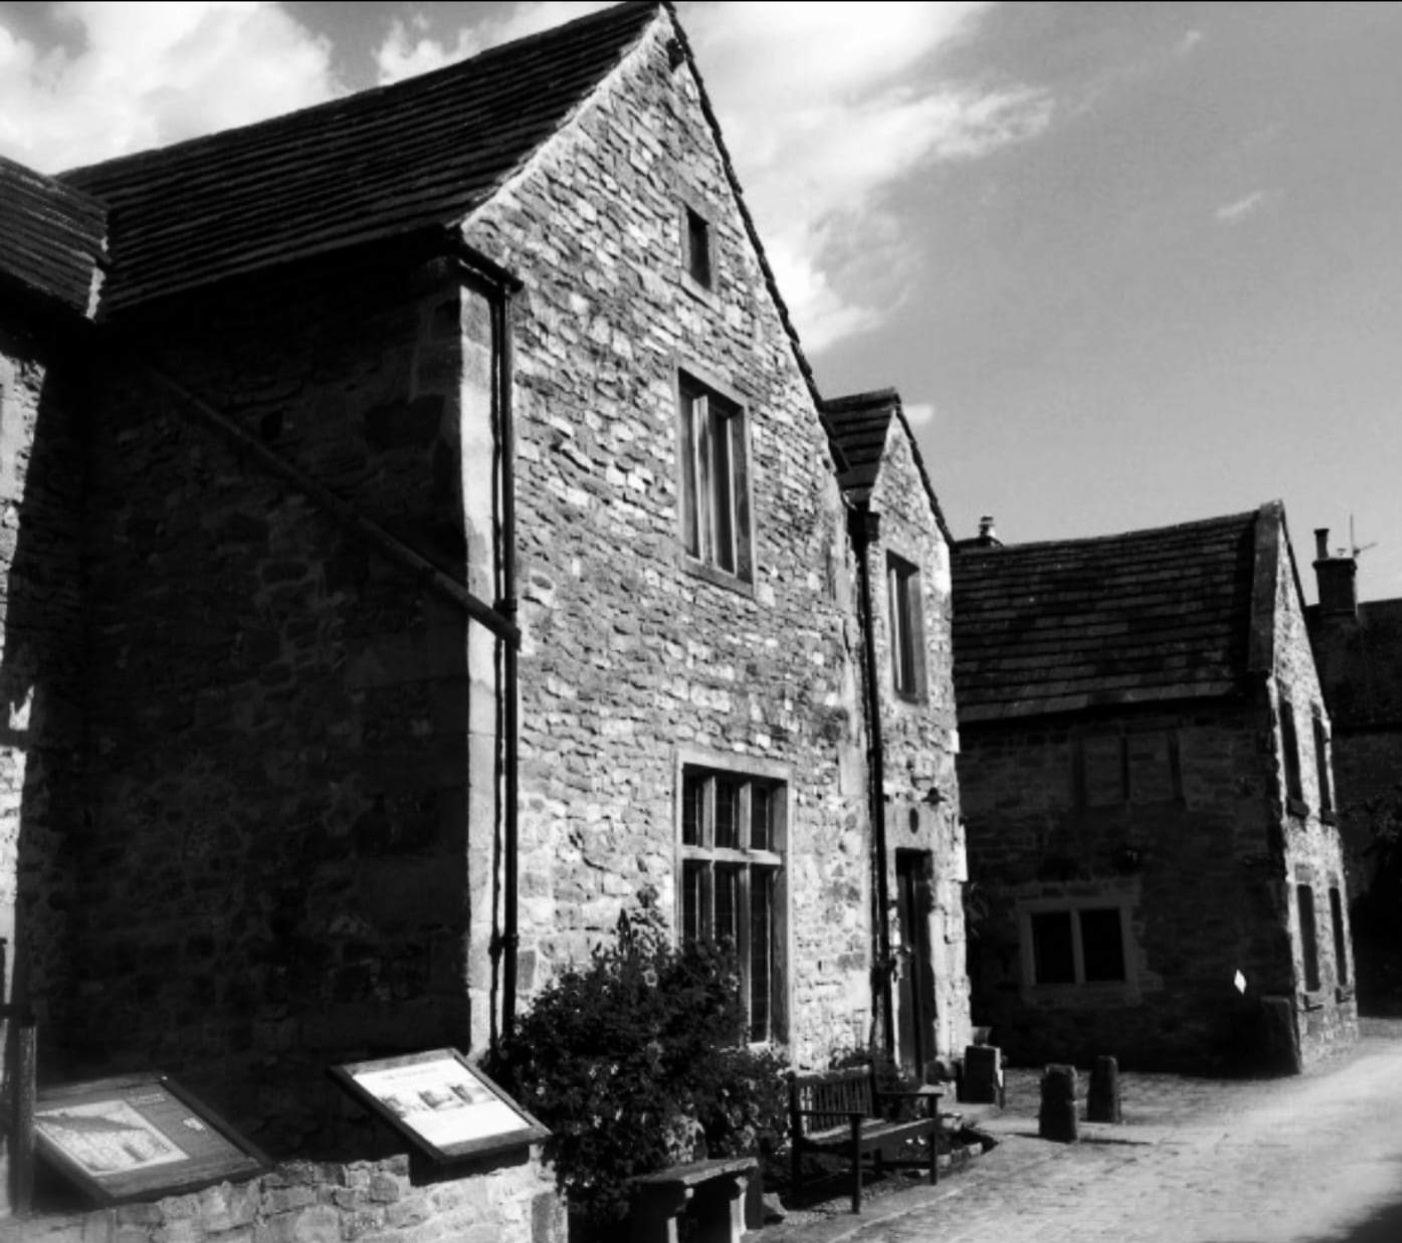 The Old House Ghost Hunt Bakewell Derbyshire Thumbnail Image